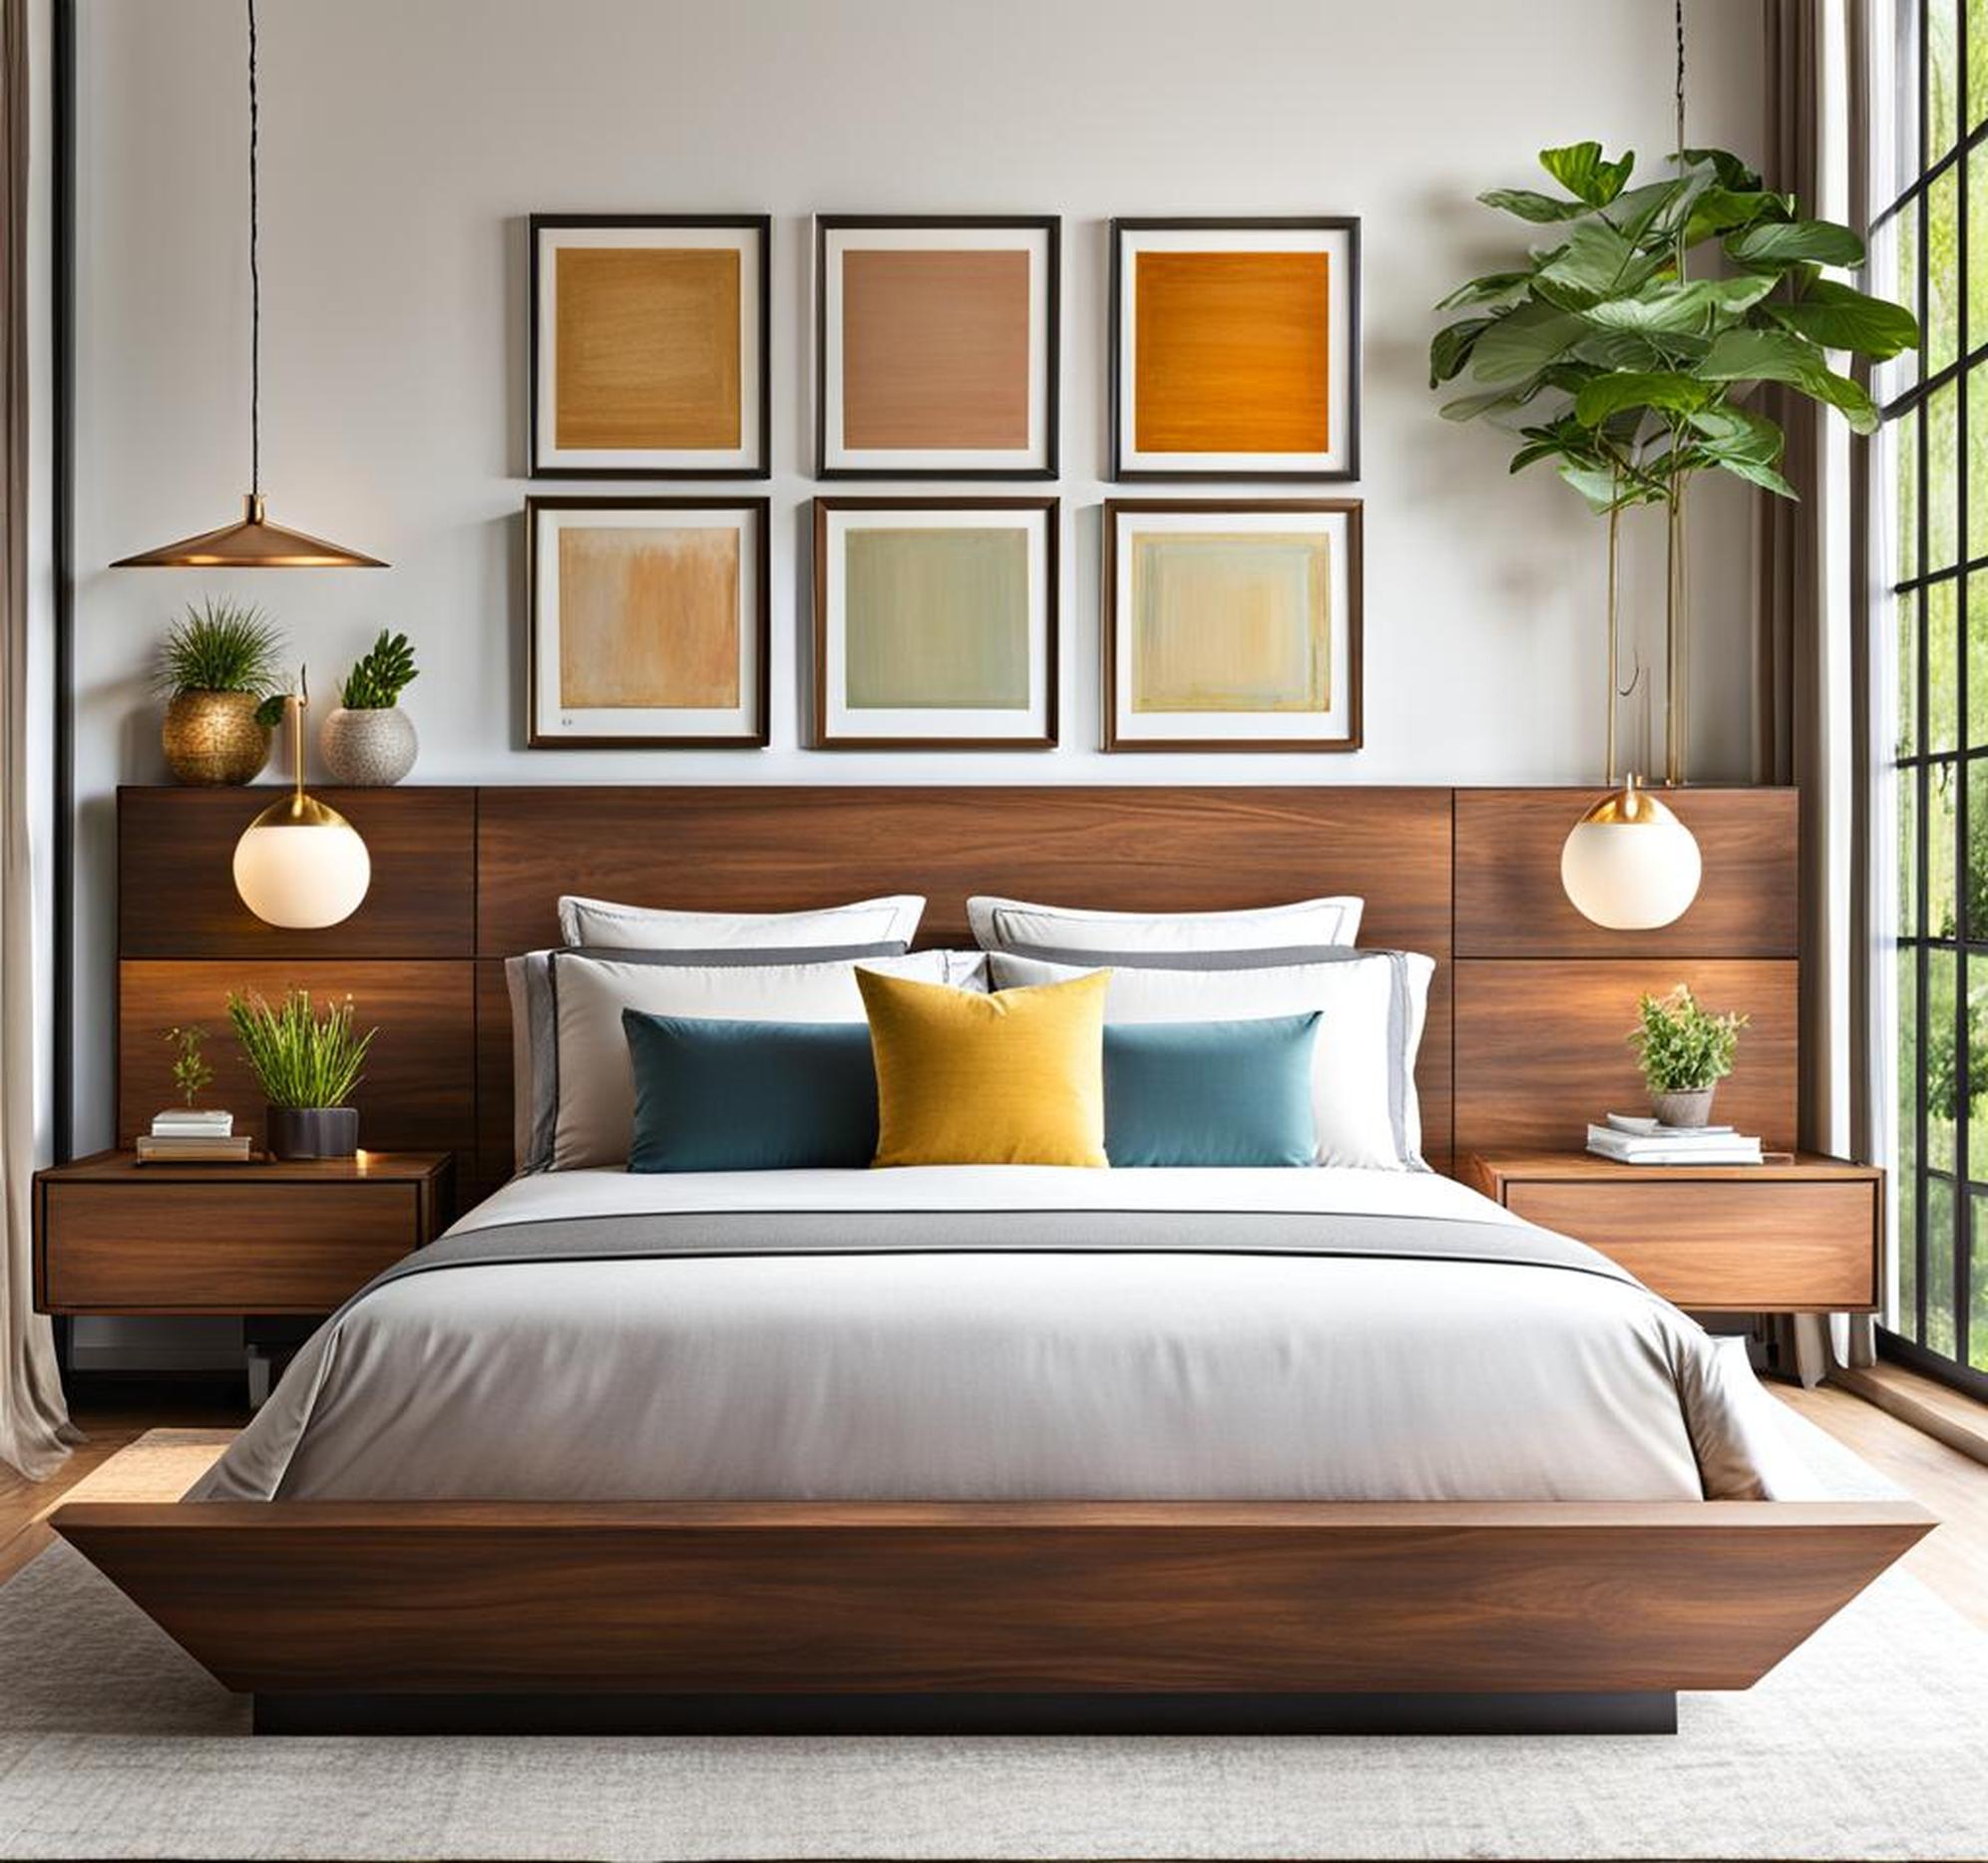 how to decorate bed without headboard